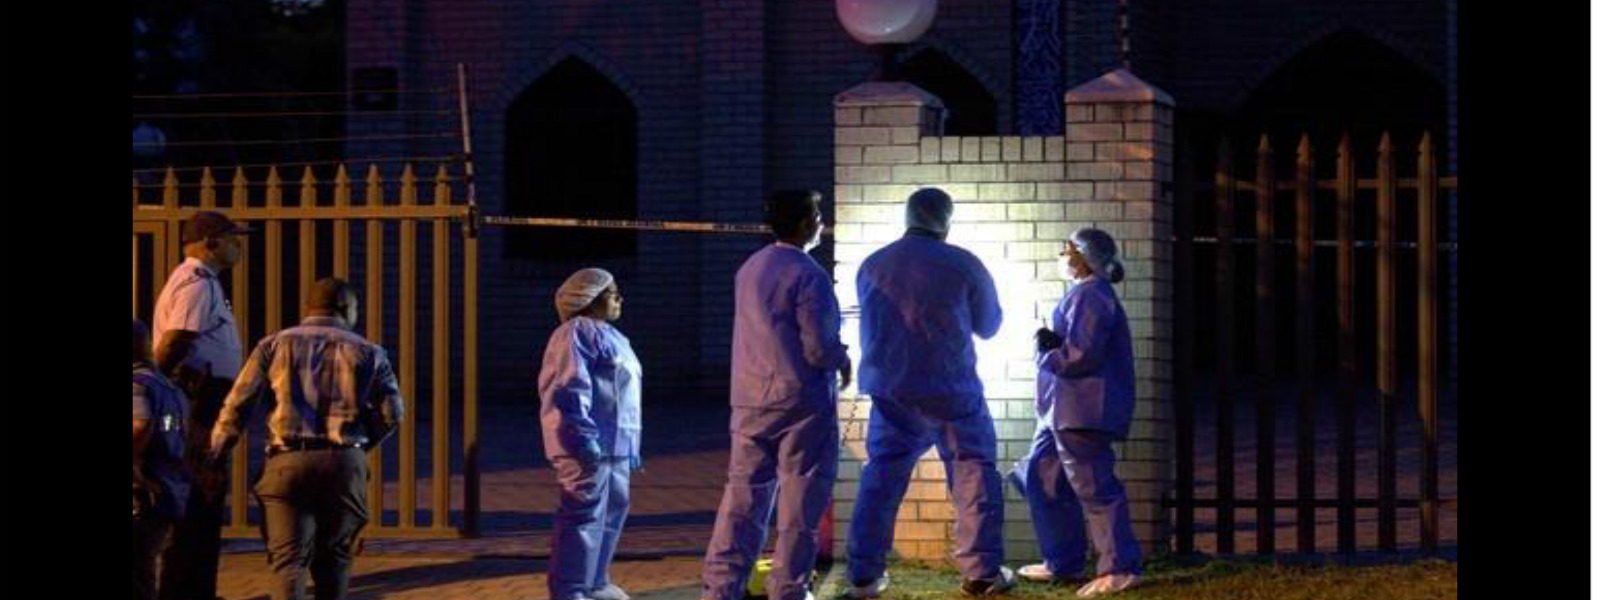 S.A. confirm device found at mosque was a bomb